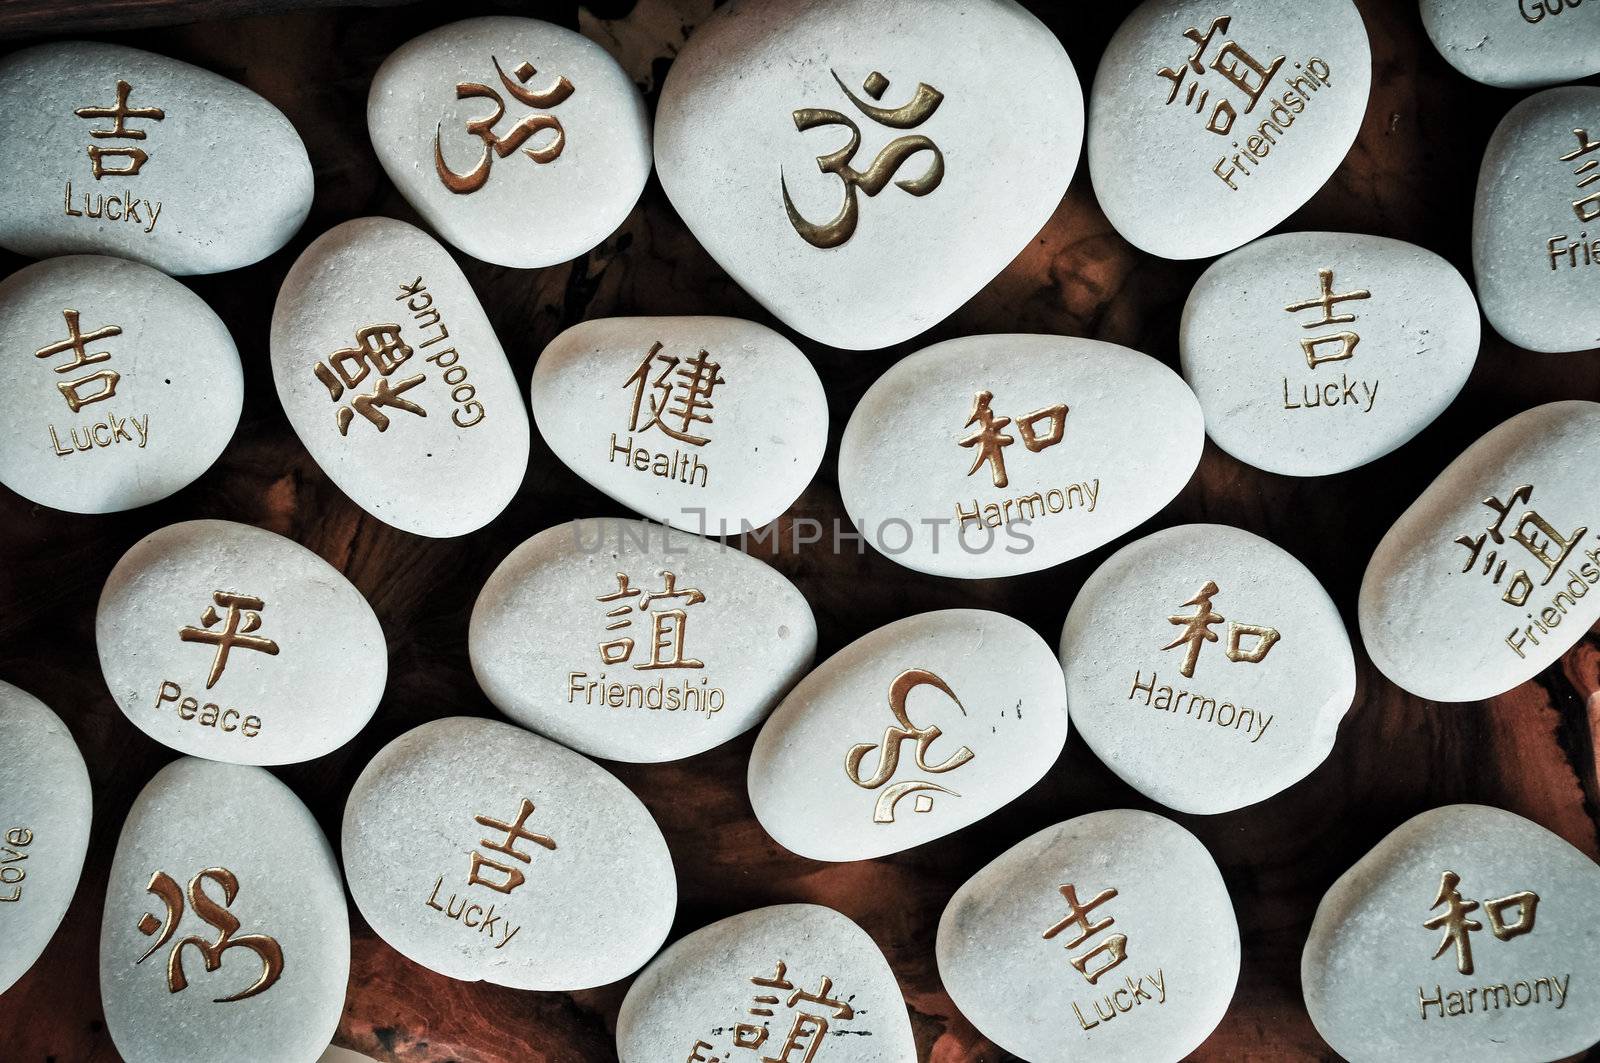 Fortune stones with symbols and writings settled on a wooden table